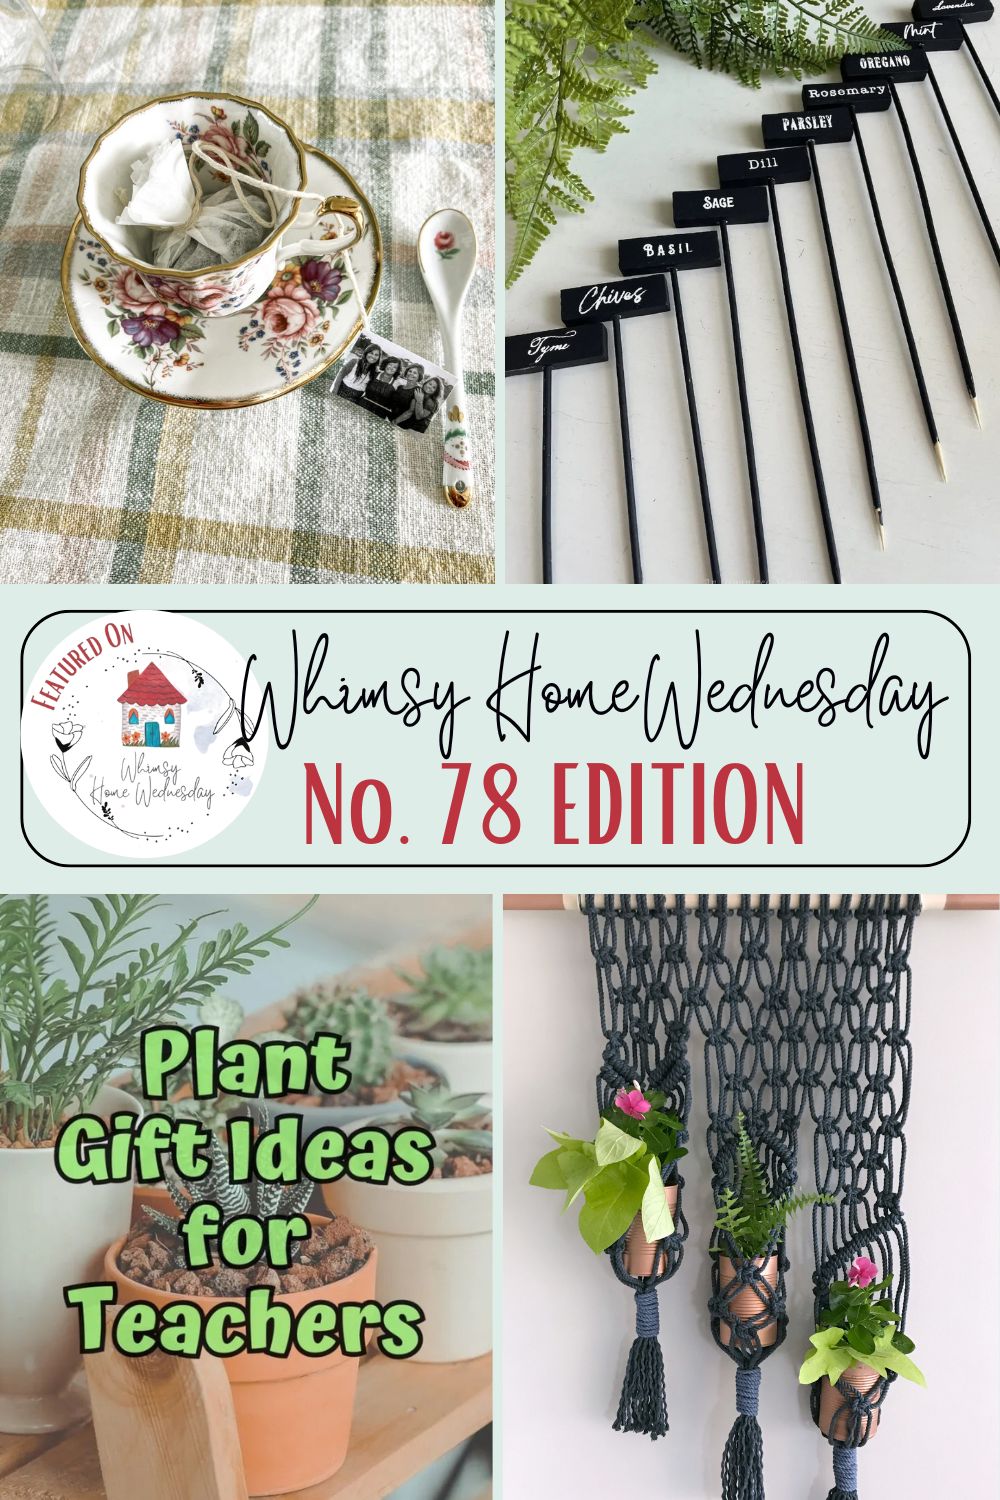 Join us on Whimsy Home Wednesday Blog Link Party No. 78 and see host projects, the features from the previous week and link up your posts!